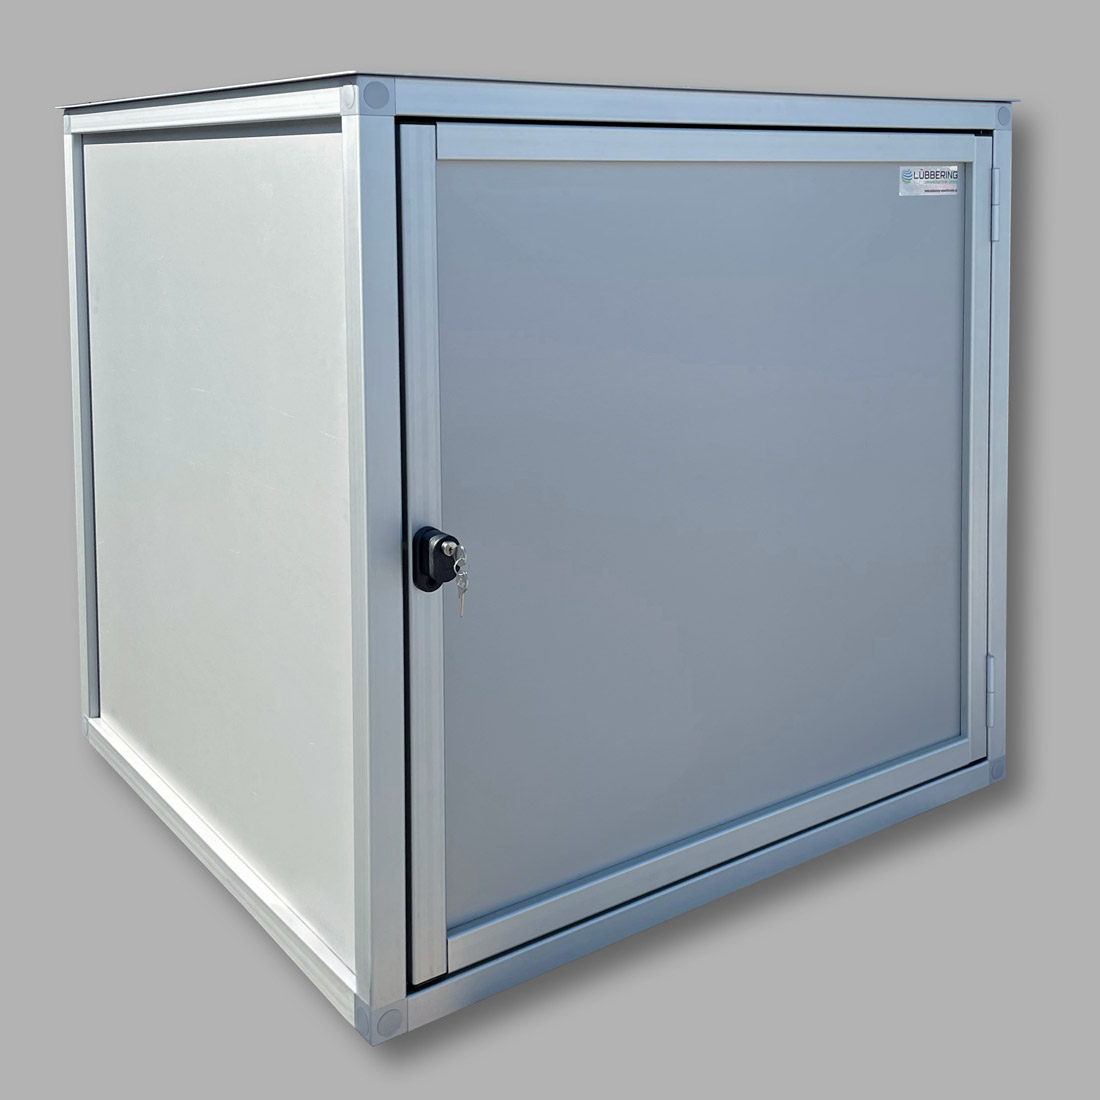 District heating system cabinet FW-S 1